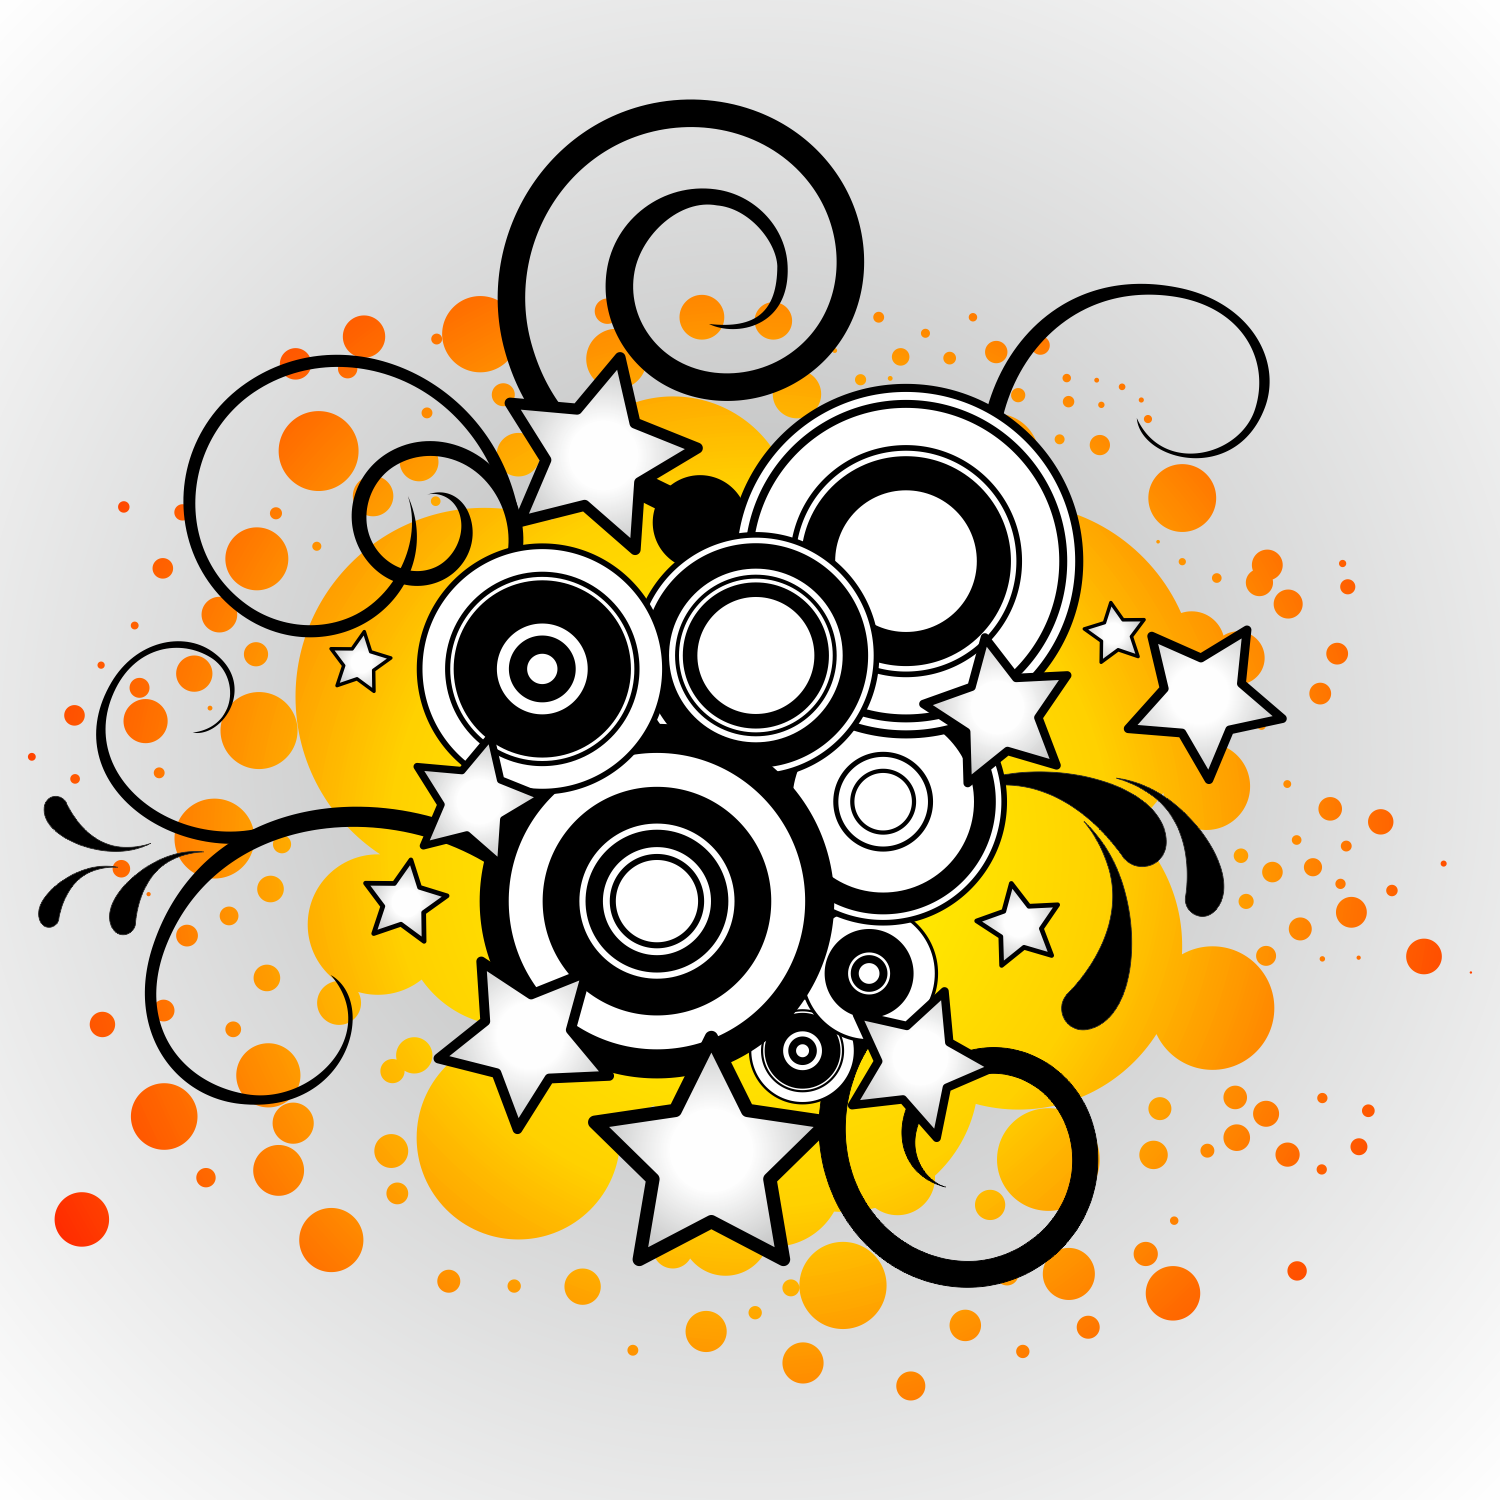 music clipart free vector - photo #35